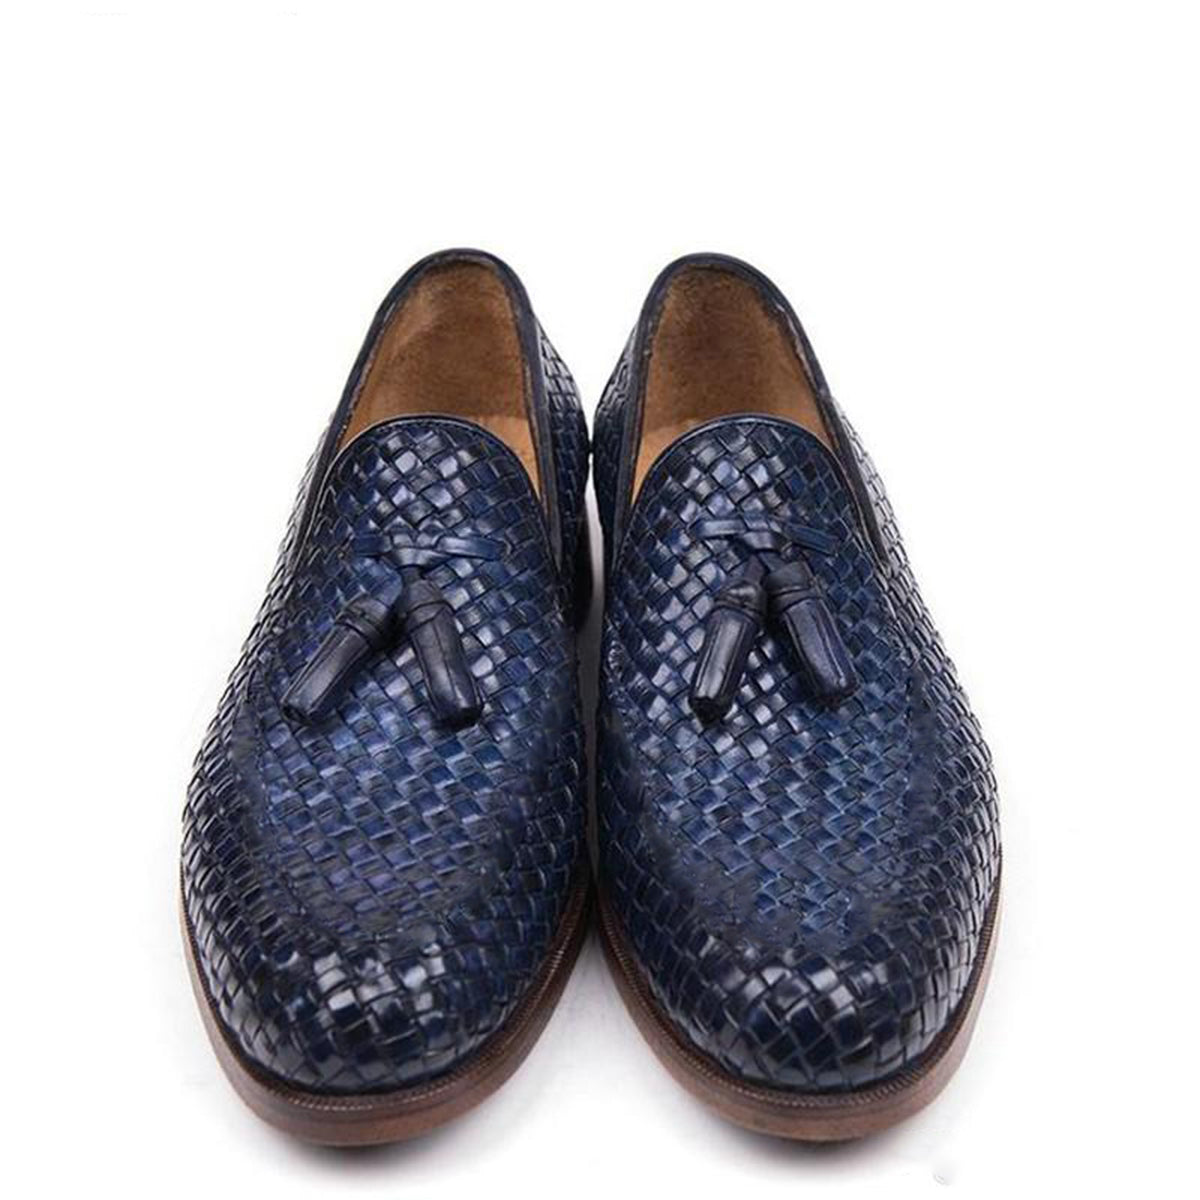 Navy Blue Patina Finish Braided Woven Leather Formal Tassel Loafer Slip On Shoes for Men with Leather Sole. Goodyear Welted Construction Available.